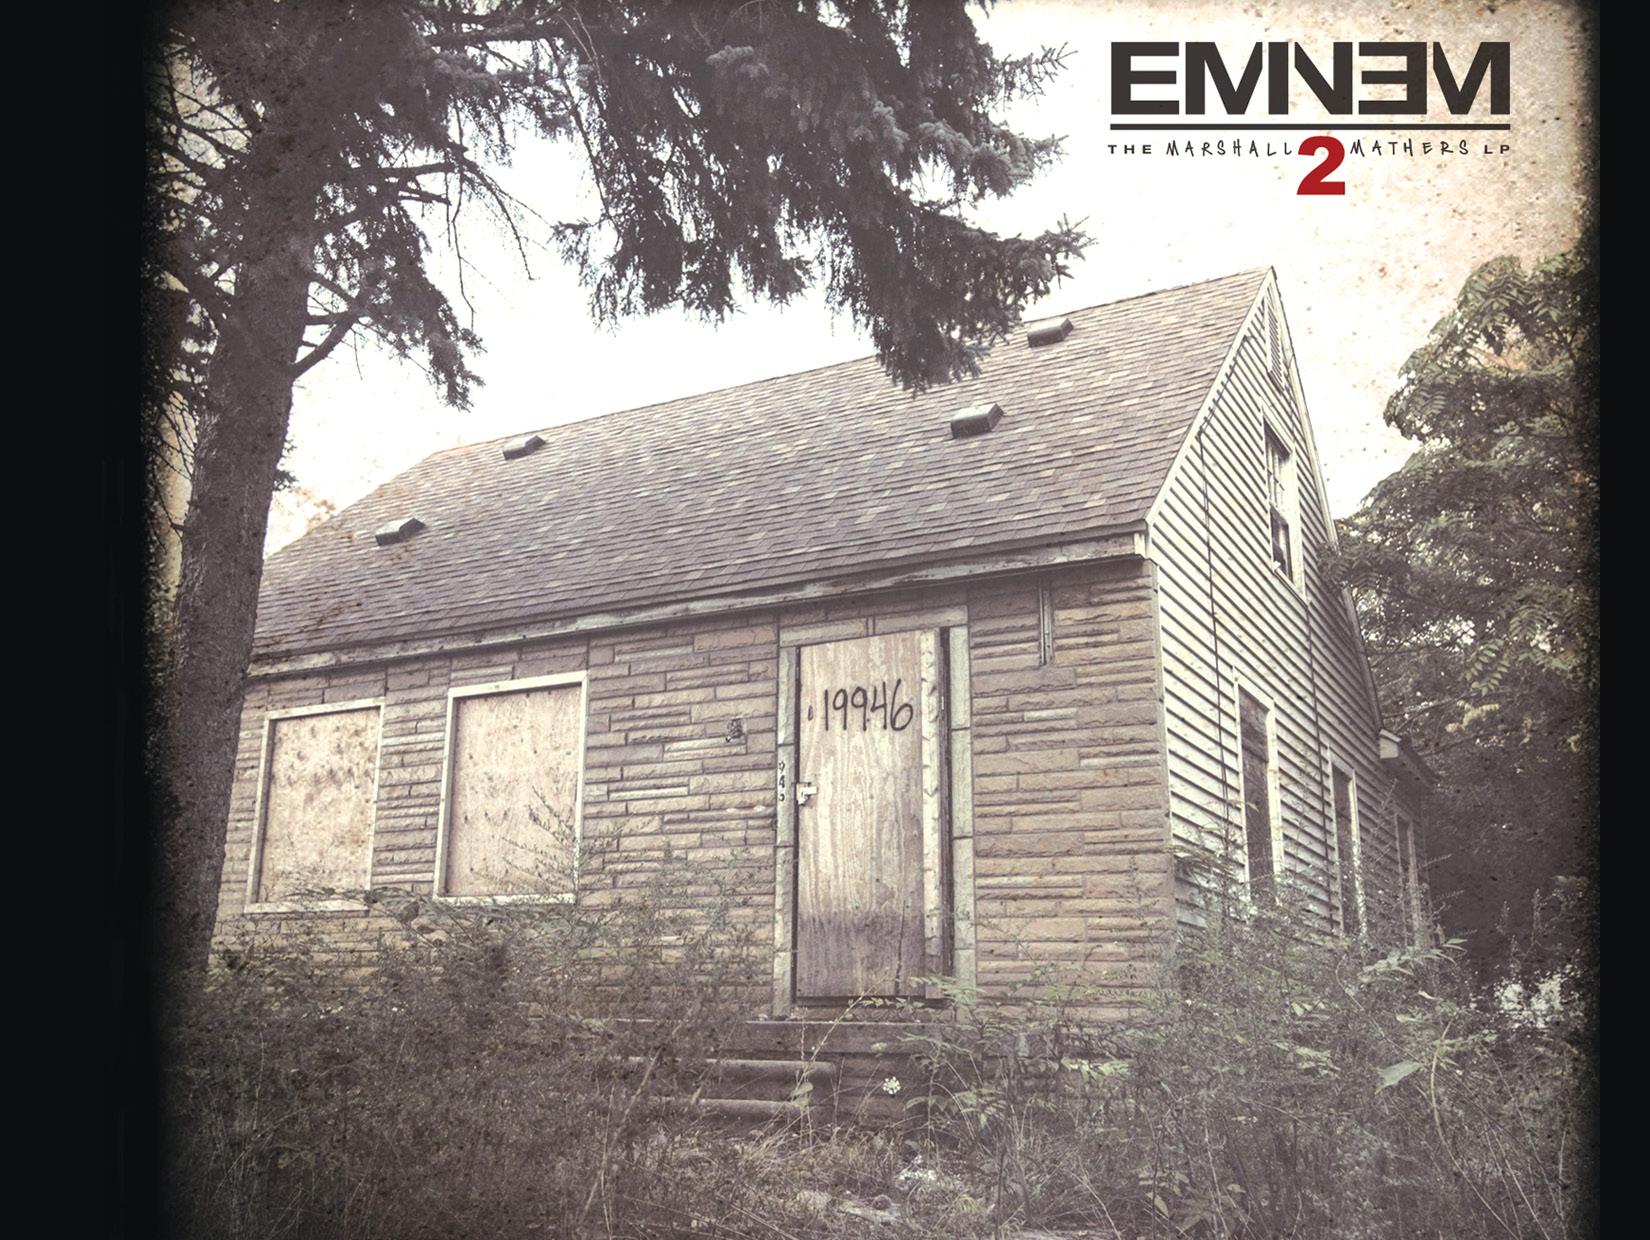 Eminem – 'Marshall Mathers LP 2' (Booklet & Production Credits) | HipHop-N-More - Part 2